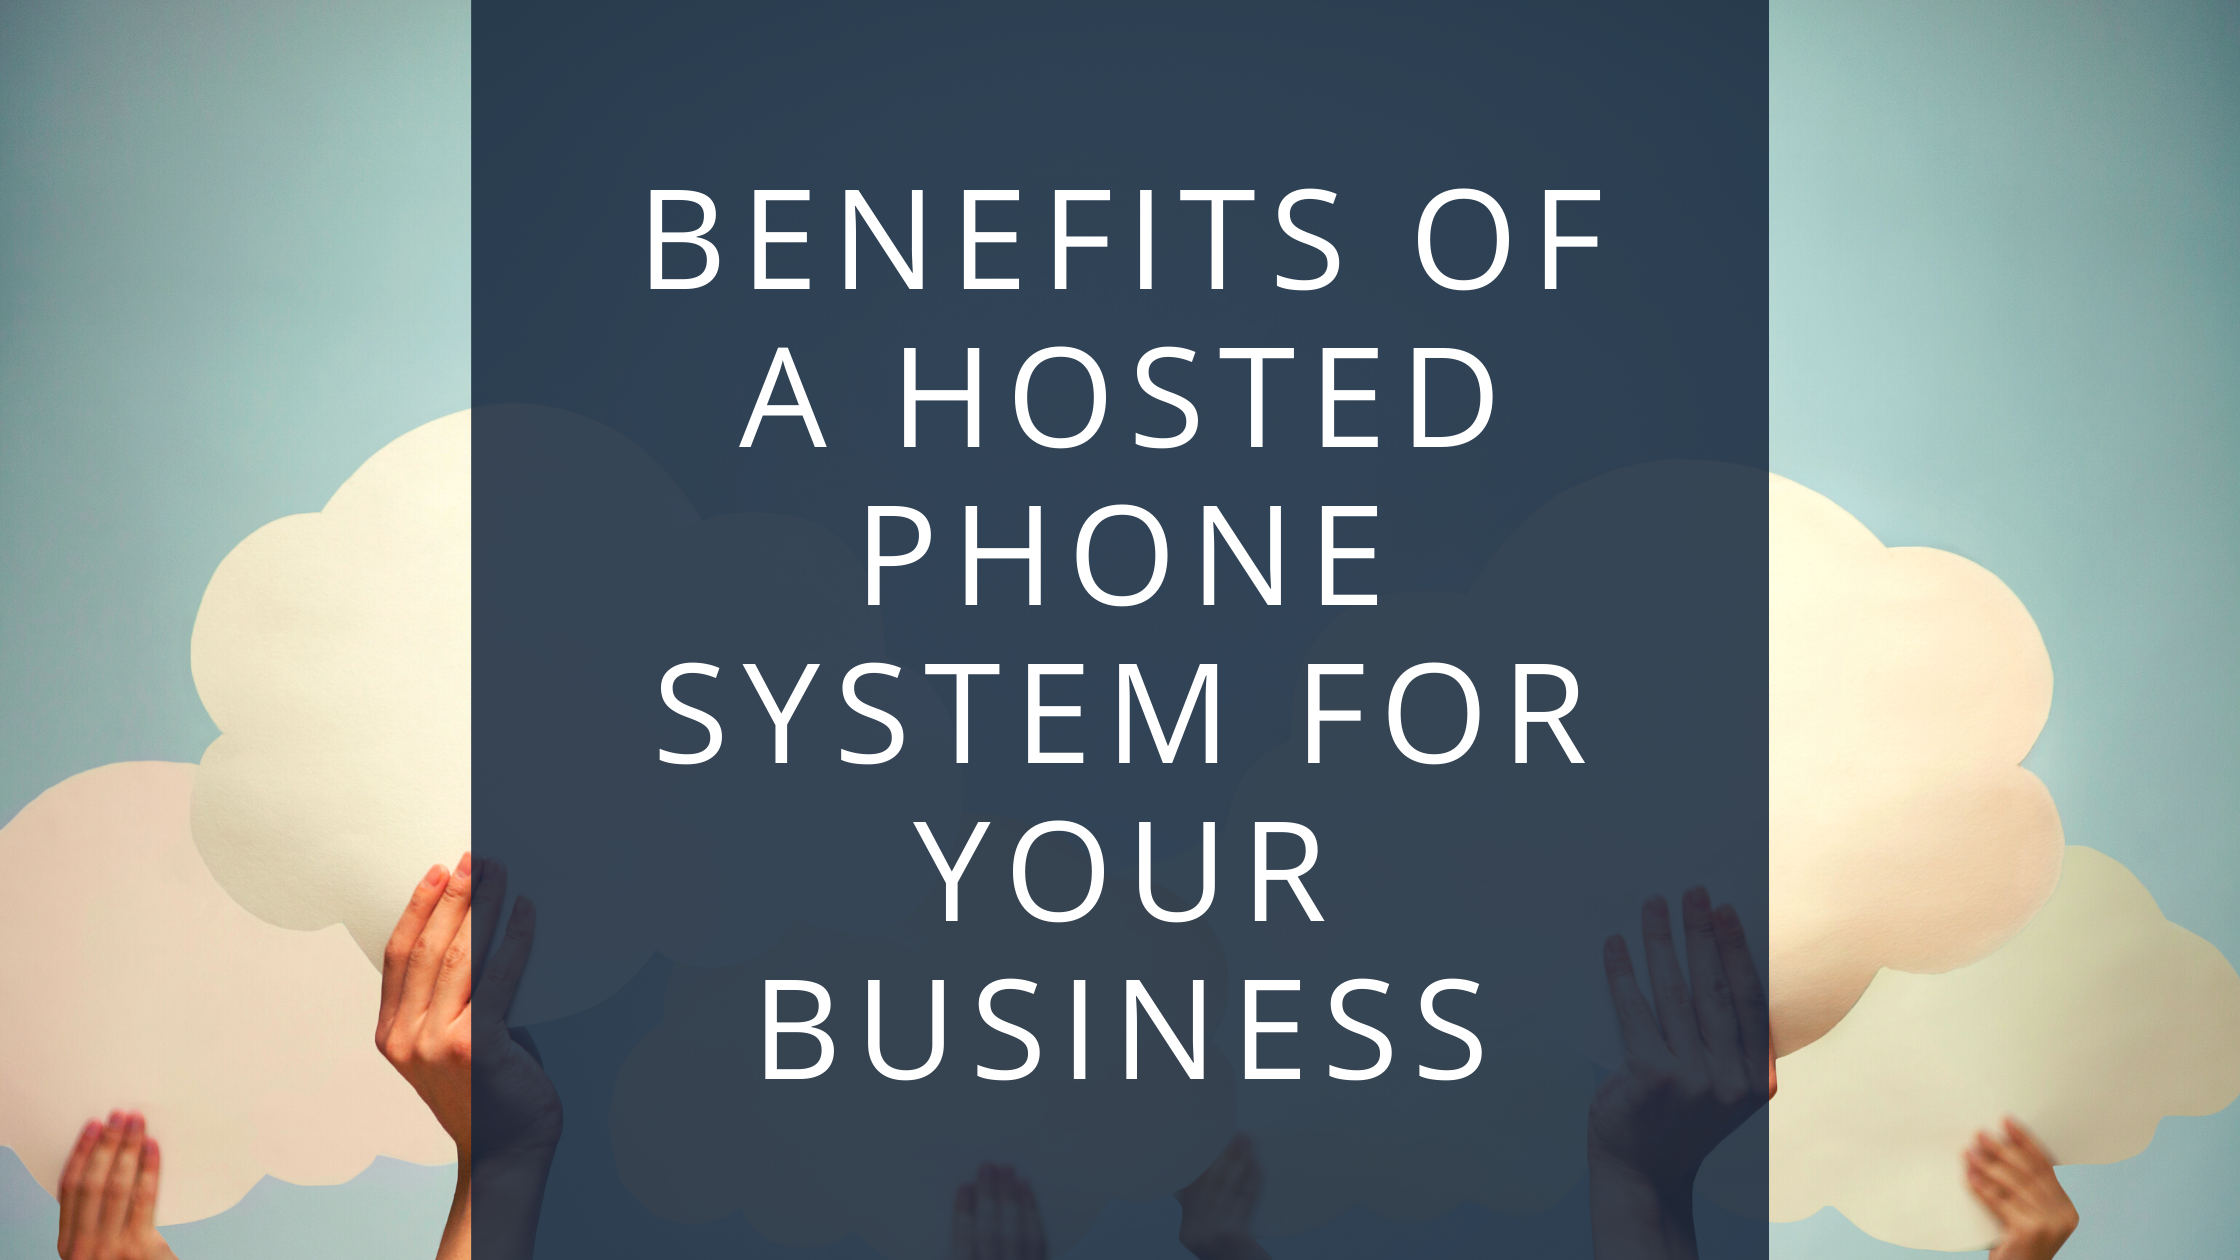 Benefits of a hosted phone system for your business